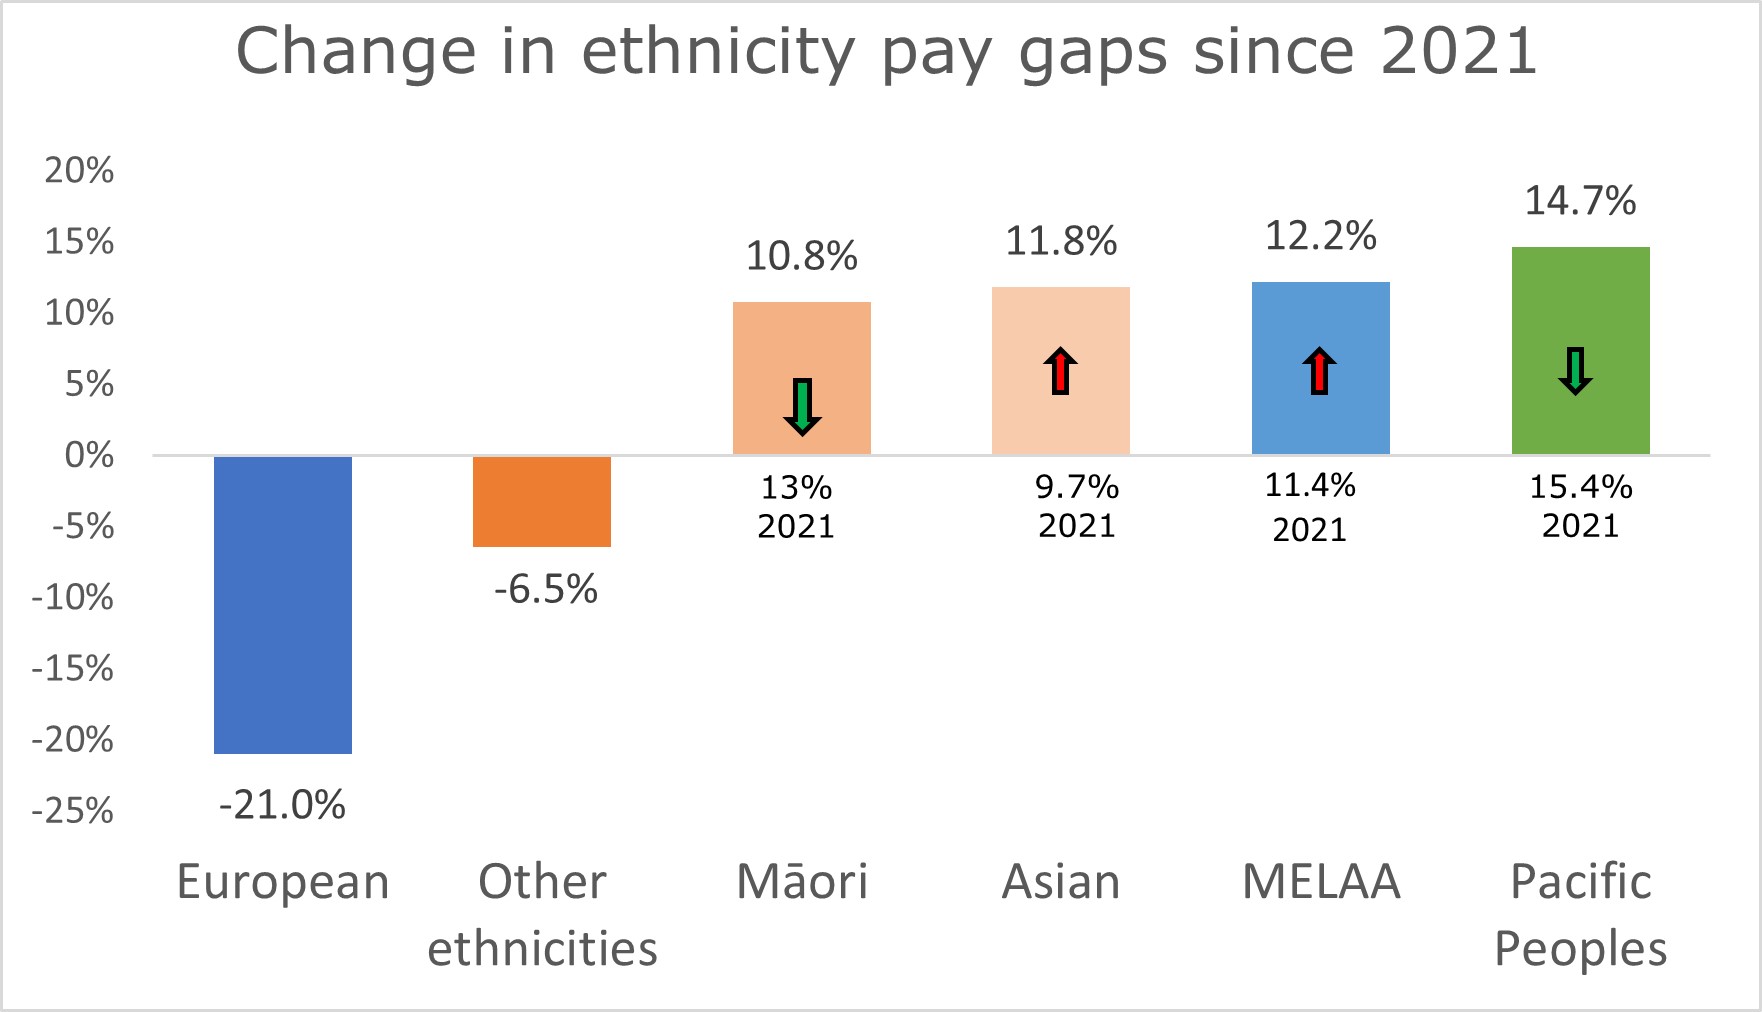 Bar graph showing change in ethnicity pay gaps since 2021. The horizontal axis shows ethnicities, the vertical axis shows percentage change.